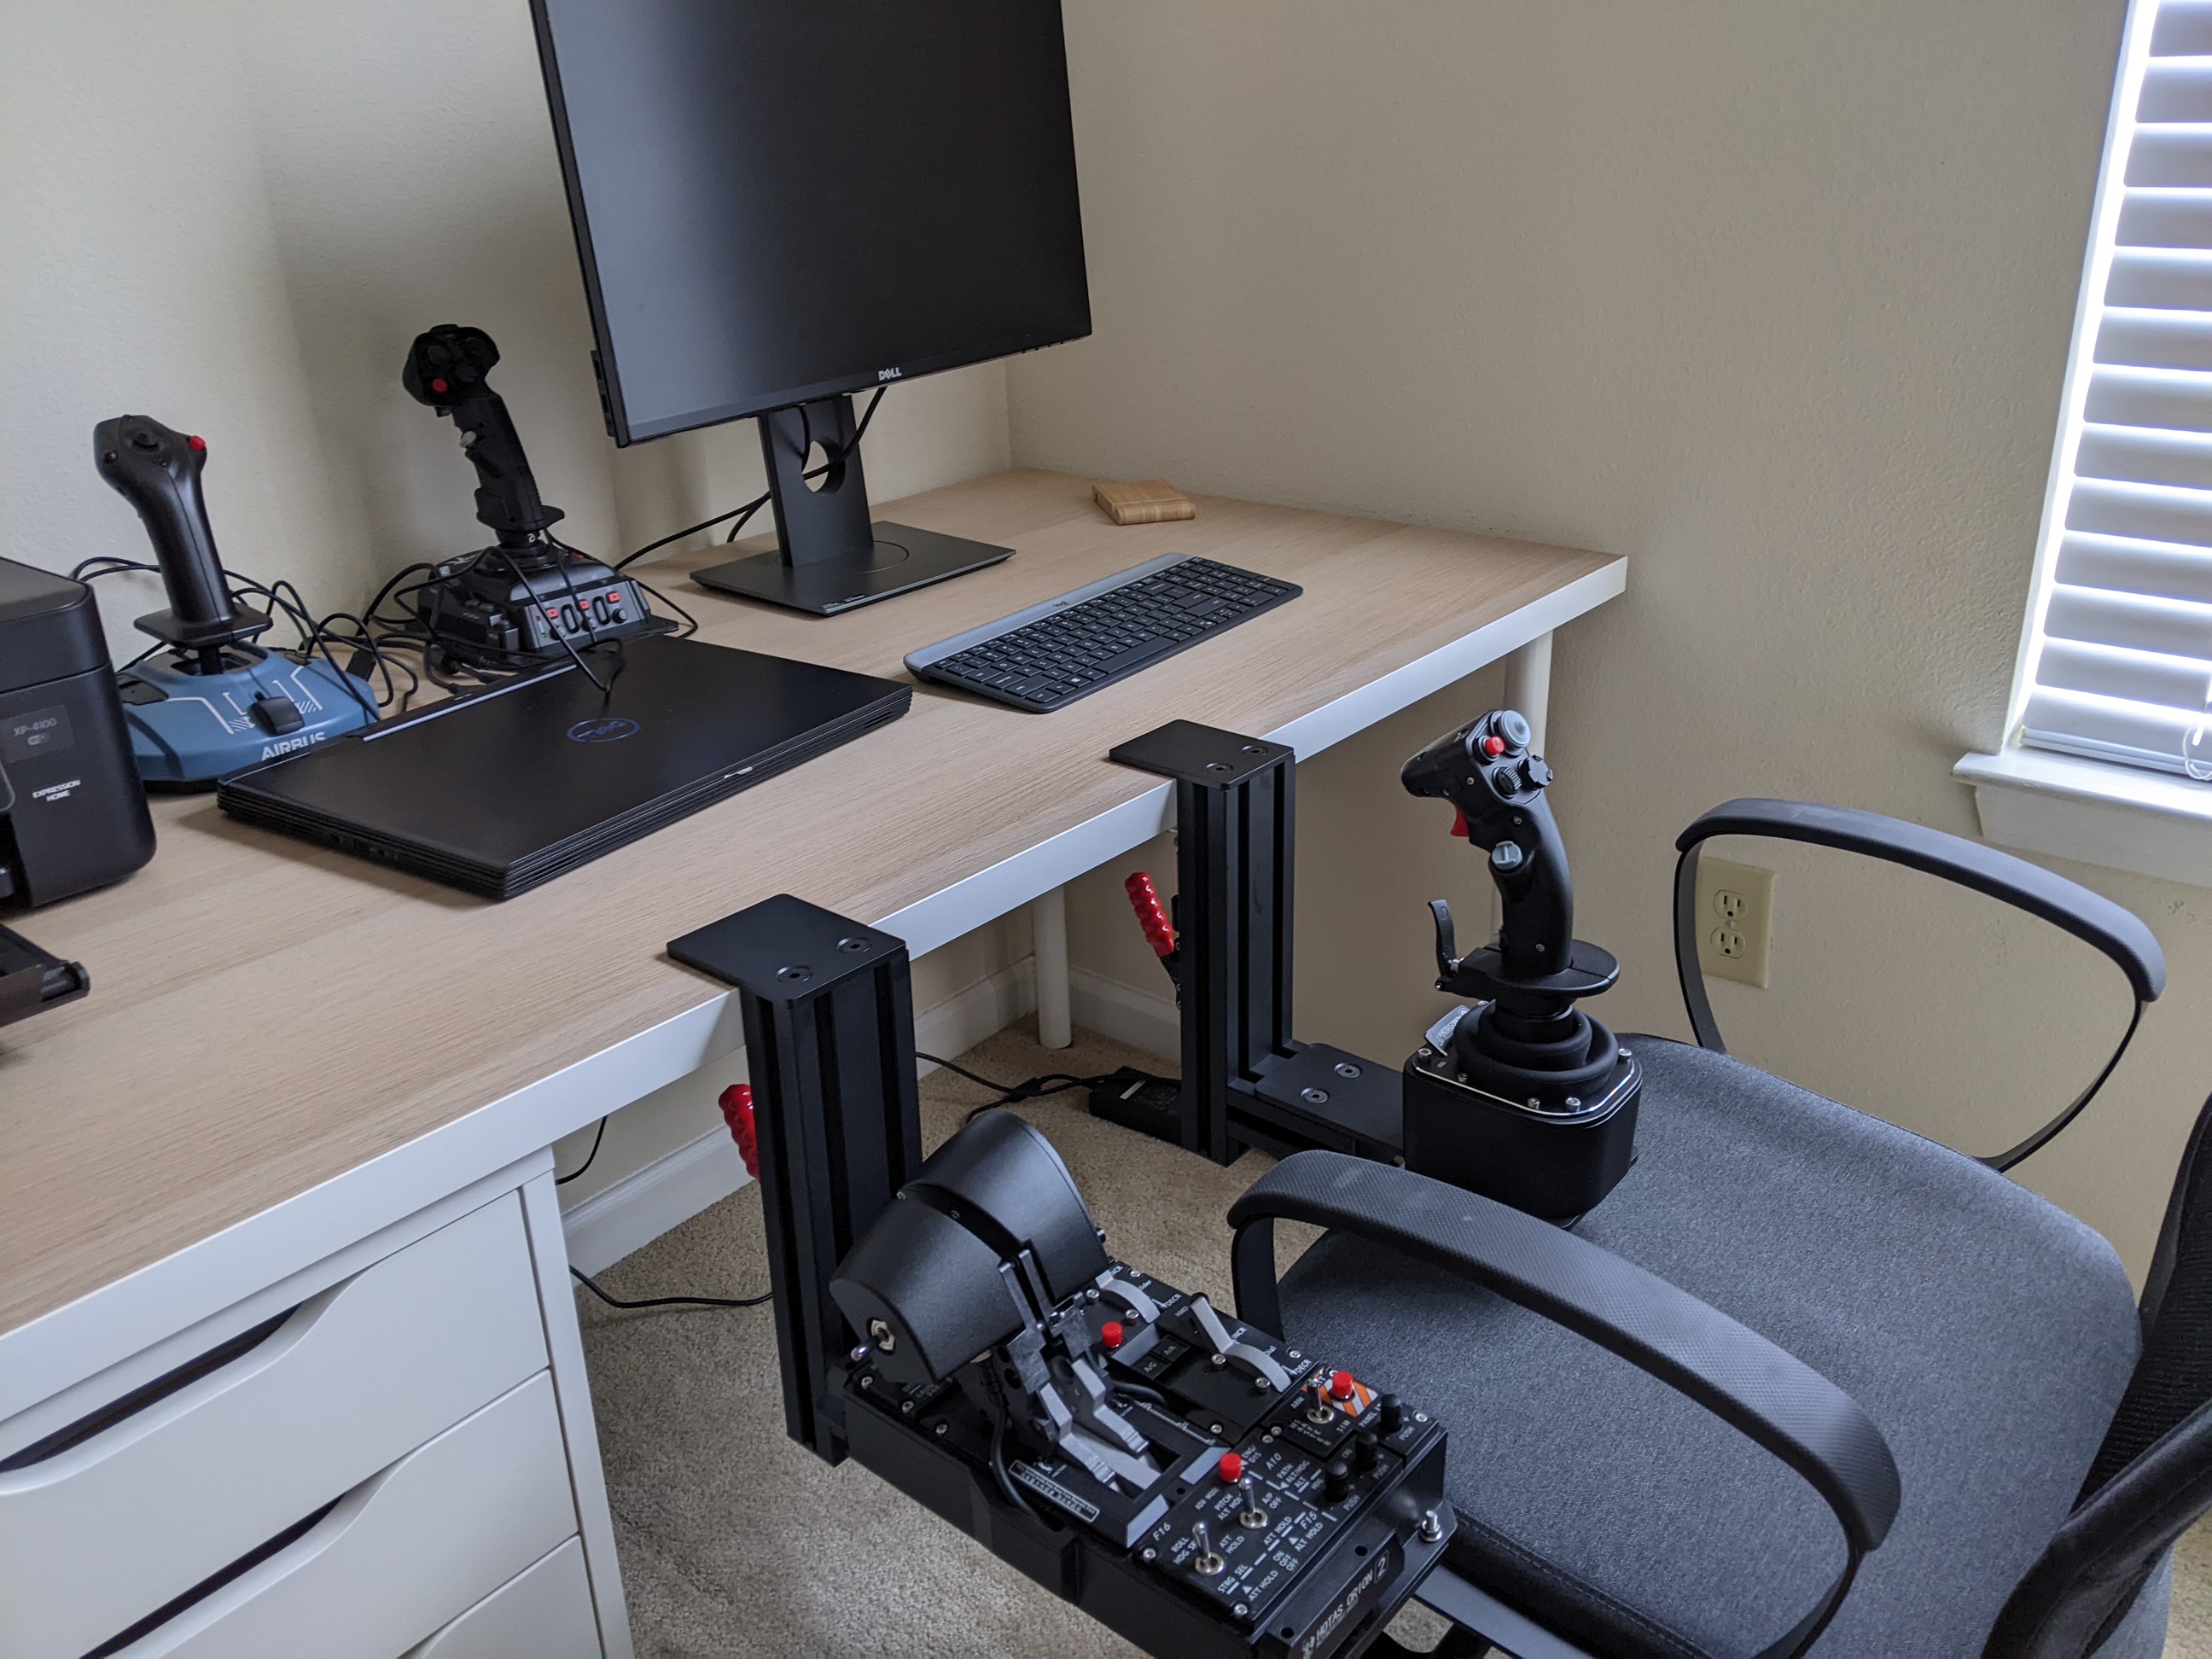 HOTAS Desk Mount Recommendations - PC Hardware and Related Software - ED  Forums